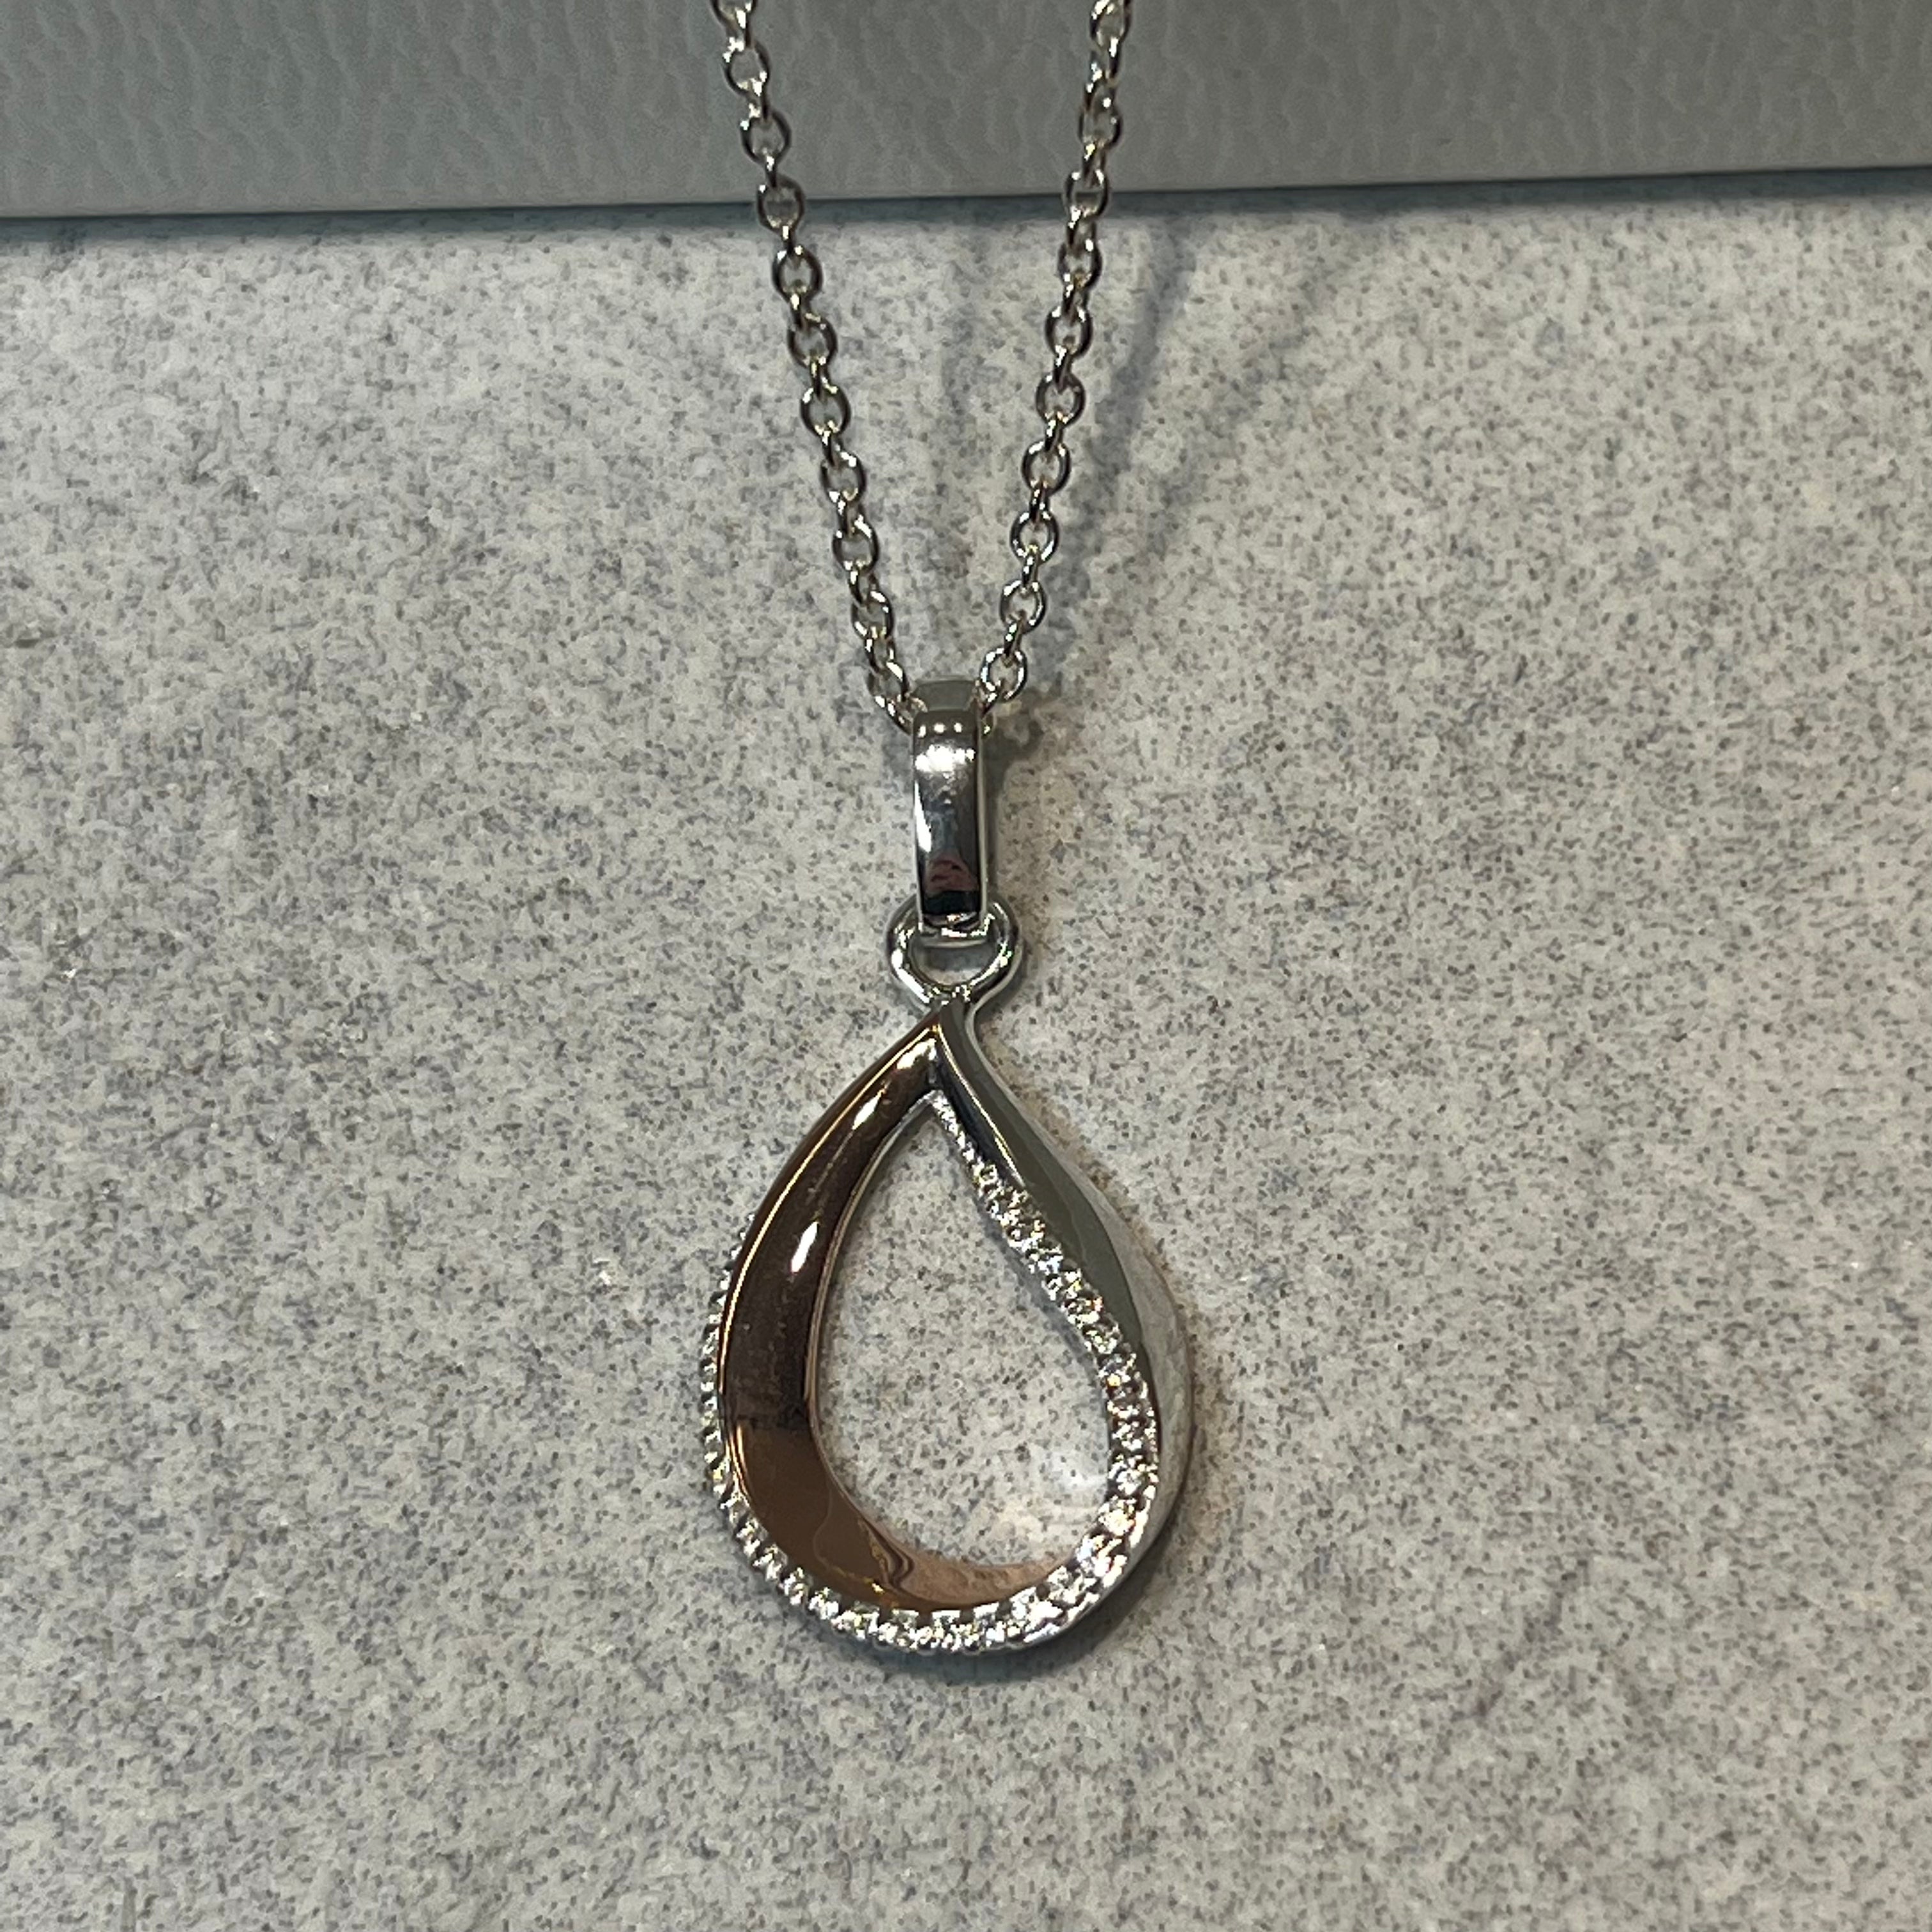 Unique Sterling Silver Drop Pendant With Rose Gold Elements